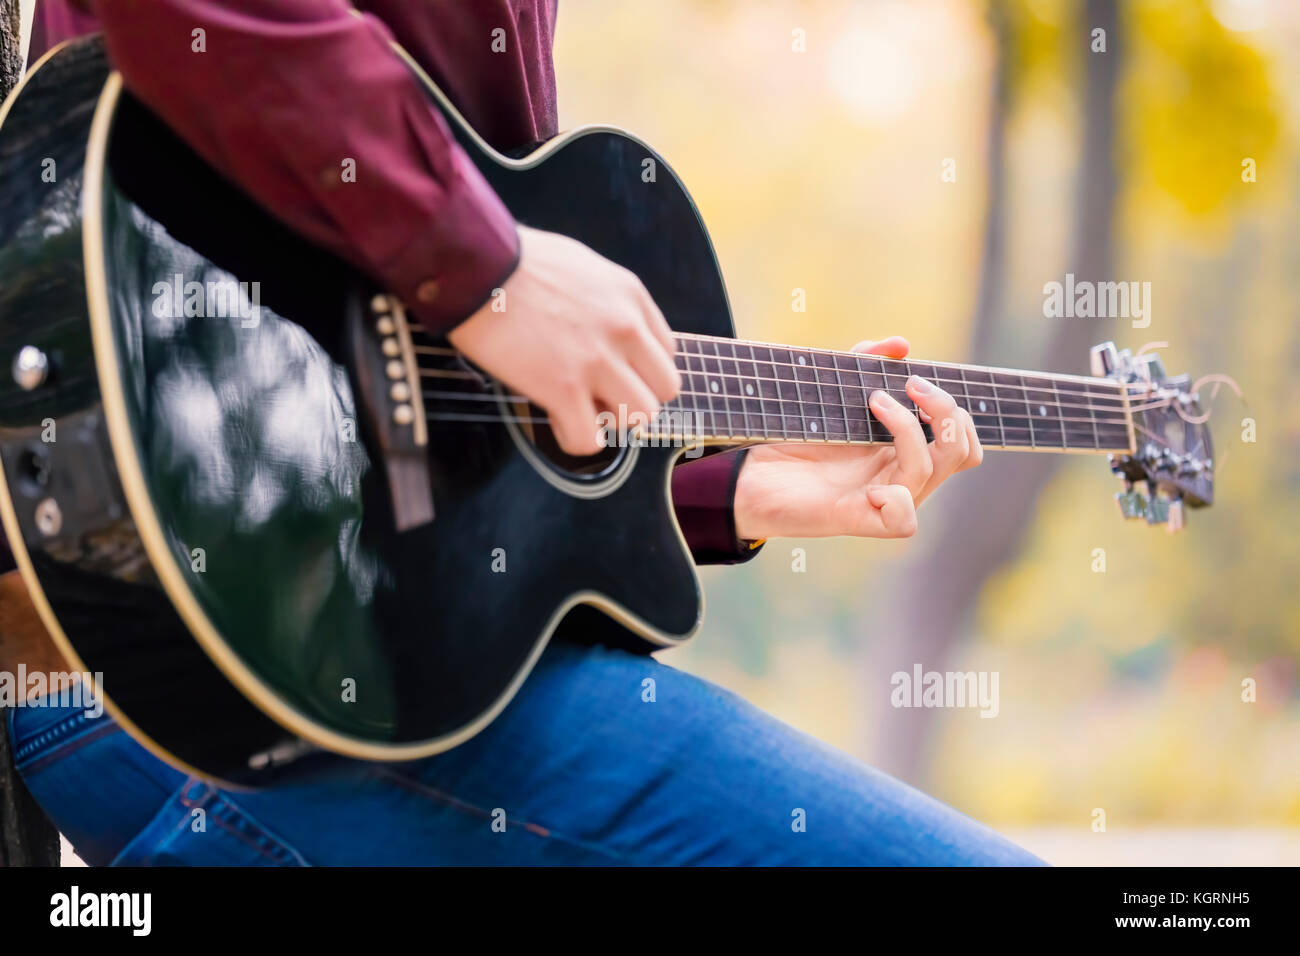 Close up person man's hands playing acoustic guitar artist musician. Focus on fingers. Stock Photo